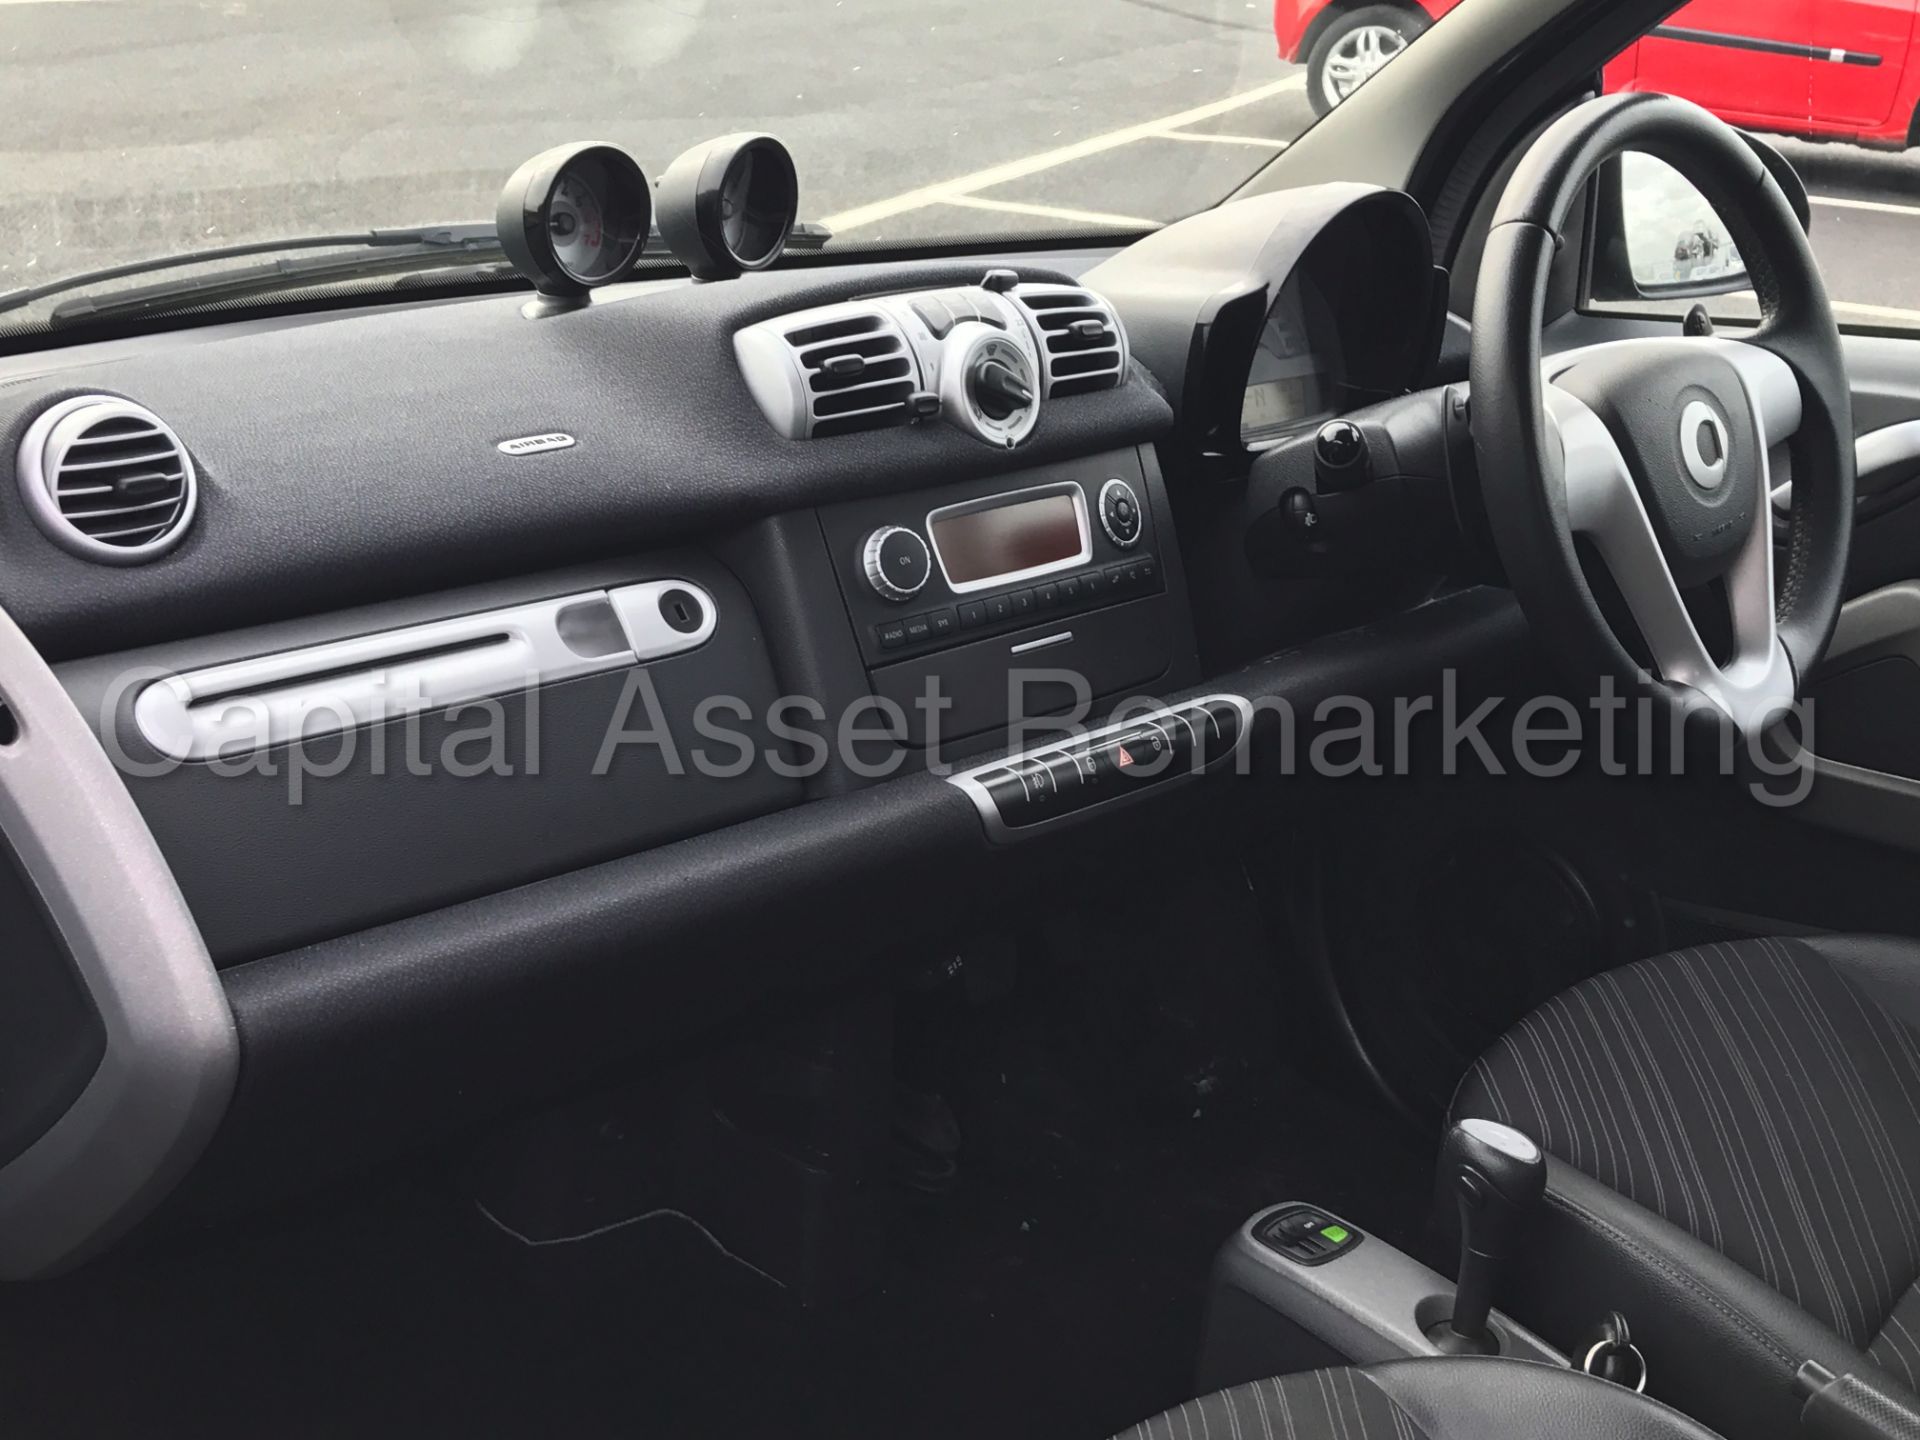 (On Sale) SMART FORTWO 'PULSE' (2013 MODEL) 'MHD - AUTO - A/C - 1 OWNER - STOP / START' (70 MPG +) - Image 20 of 21